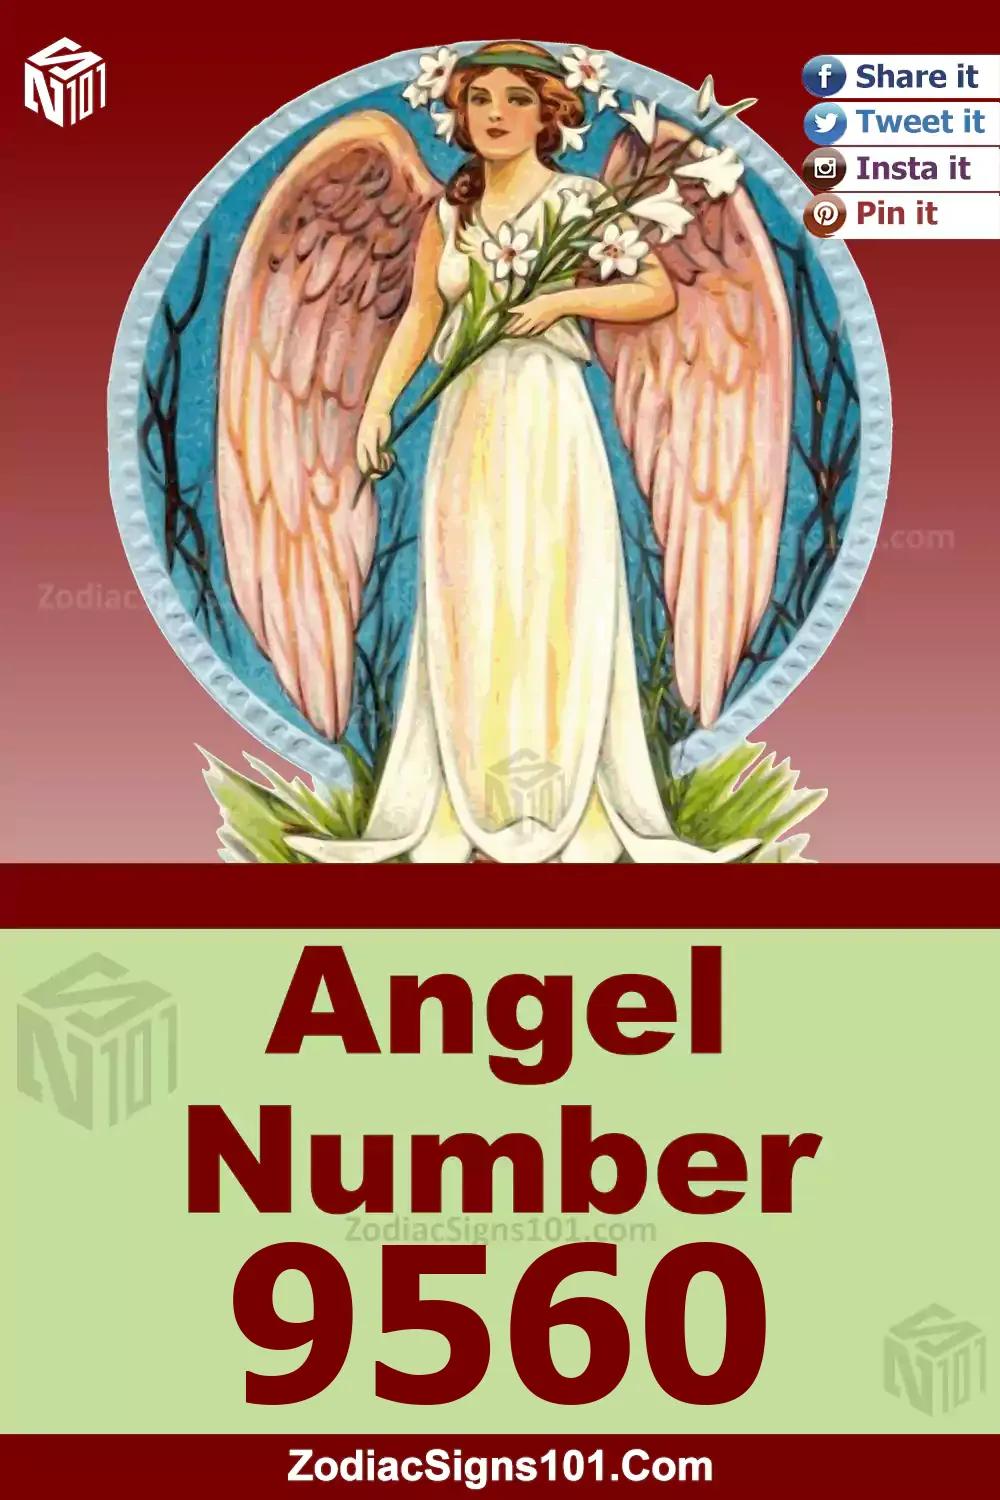 9560 Angel Number Meaning